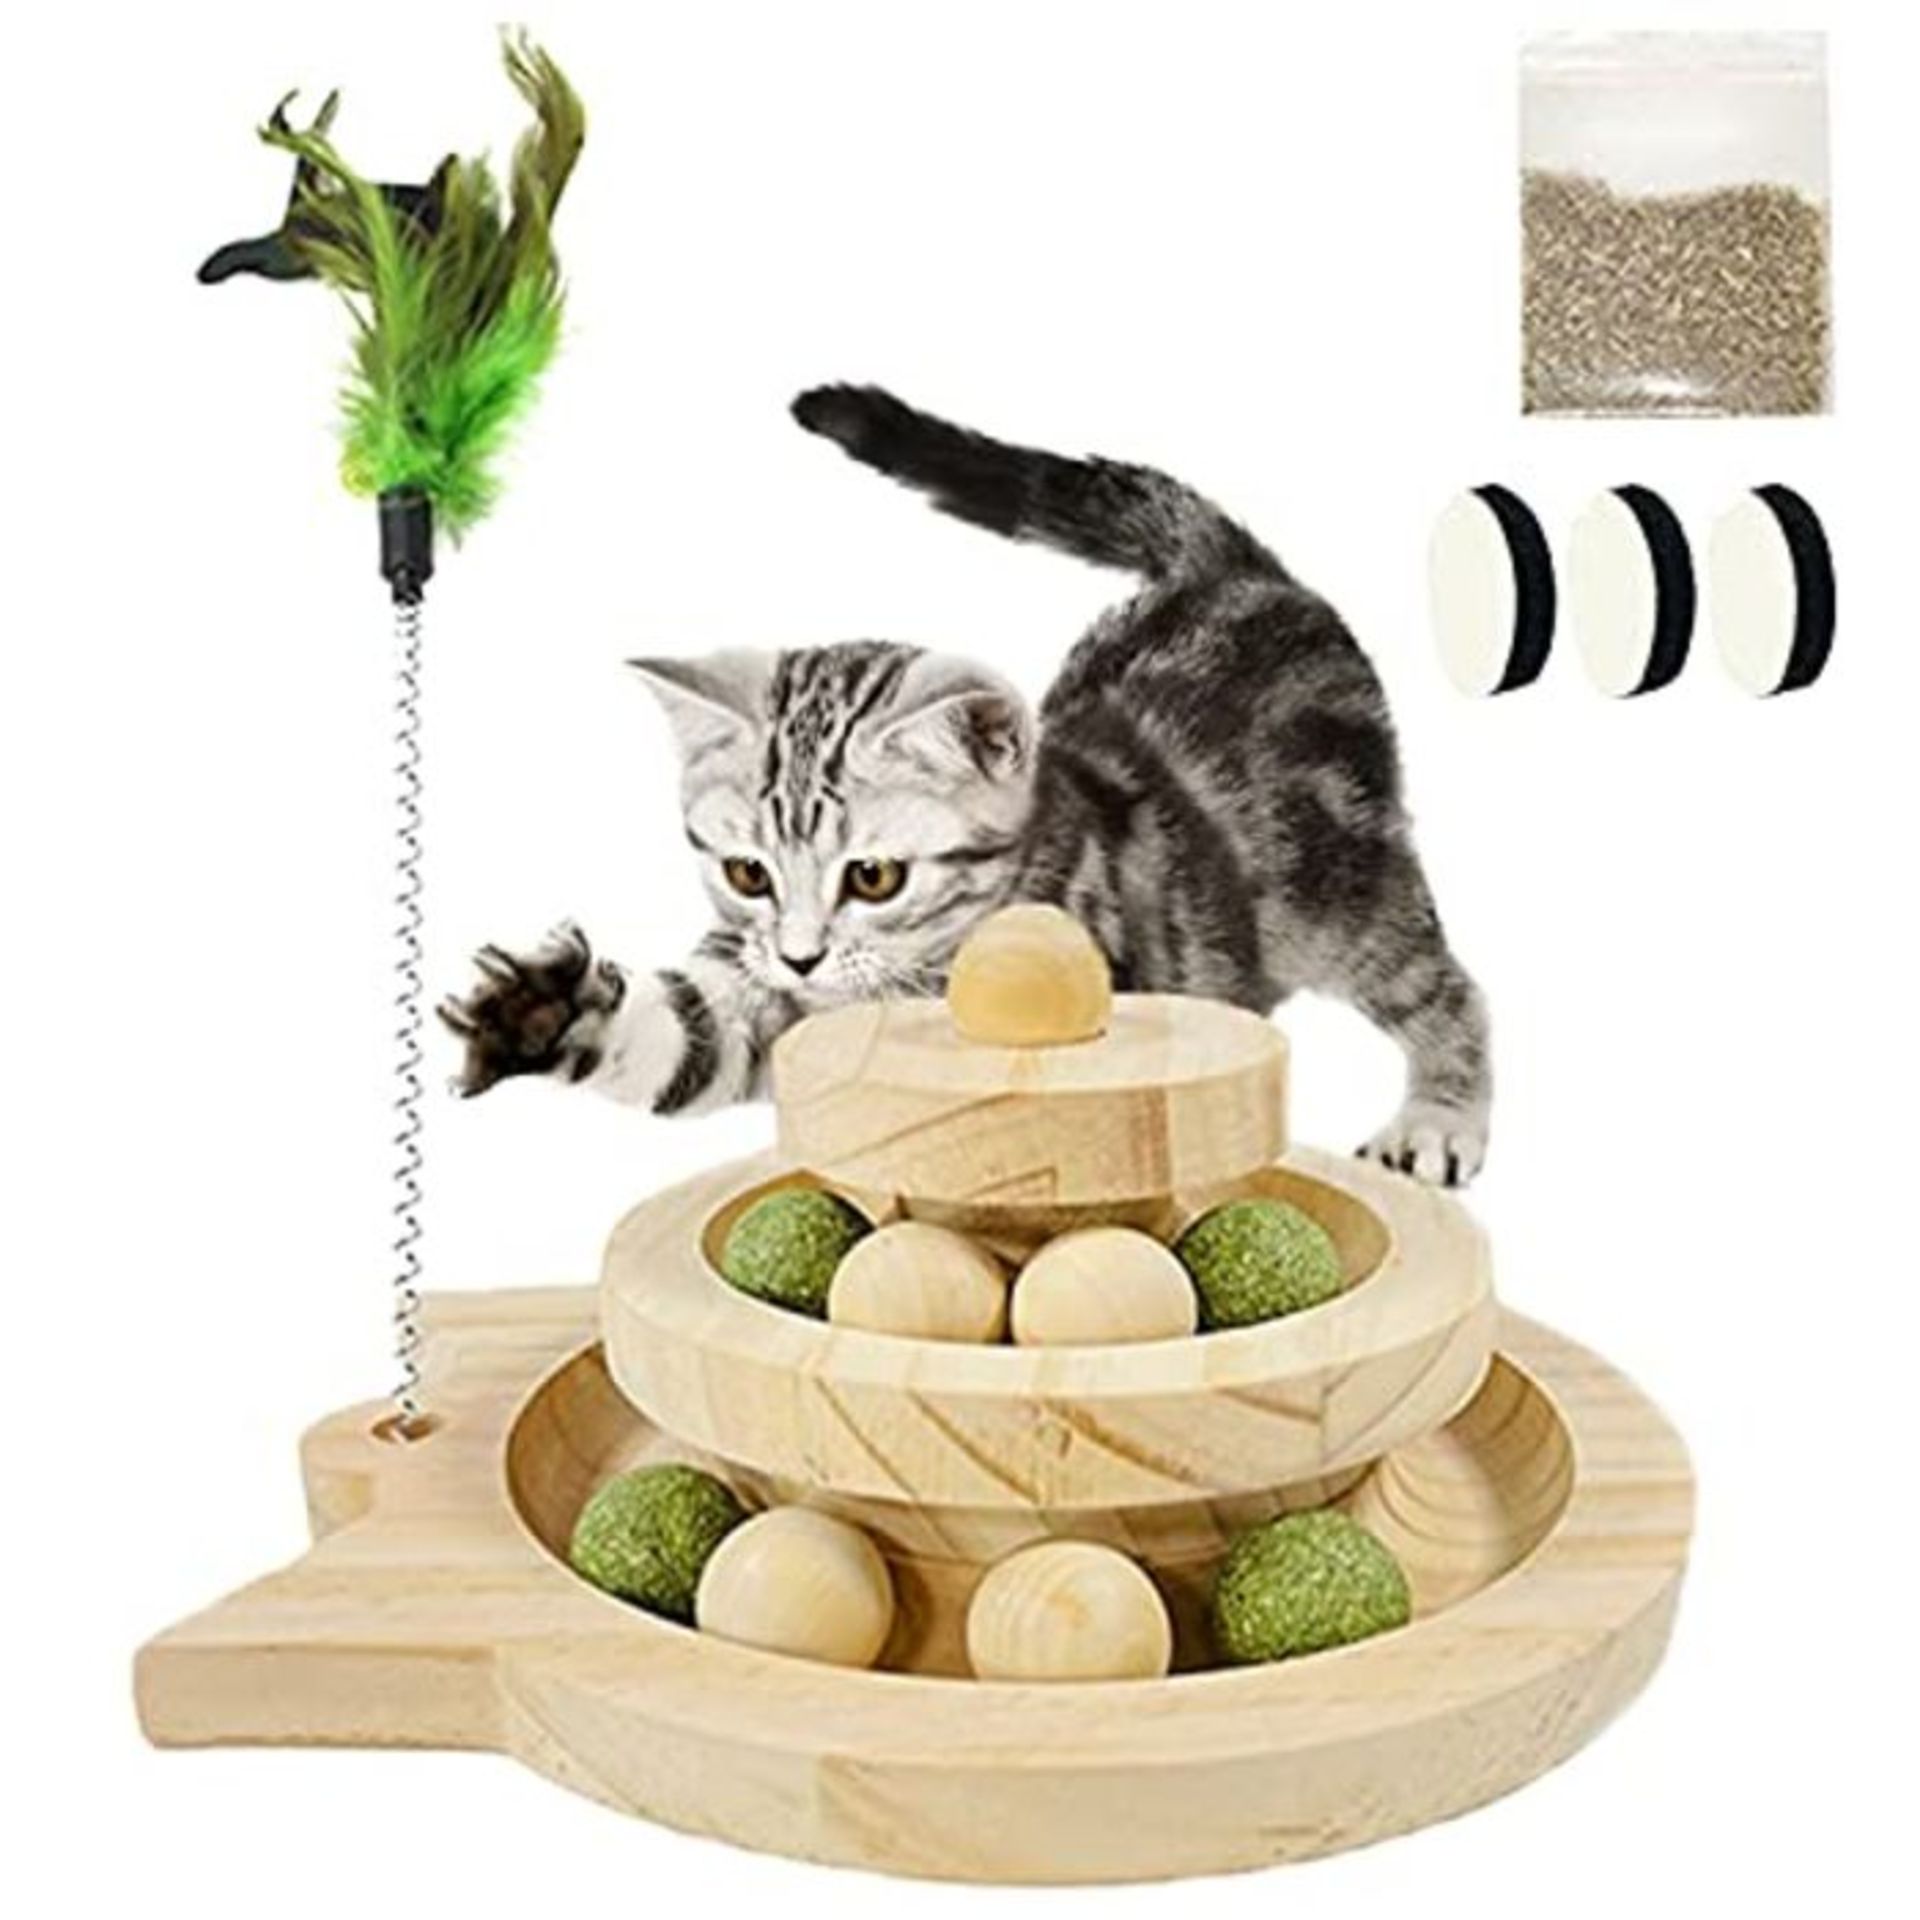 CJWDZ Wooden Ball Cat Toy Interactive Cat Toy Wooden Ball Run Cat Tower Roll Toy with